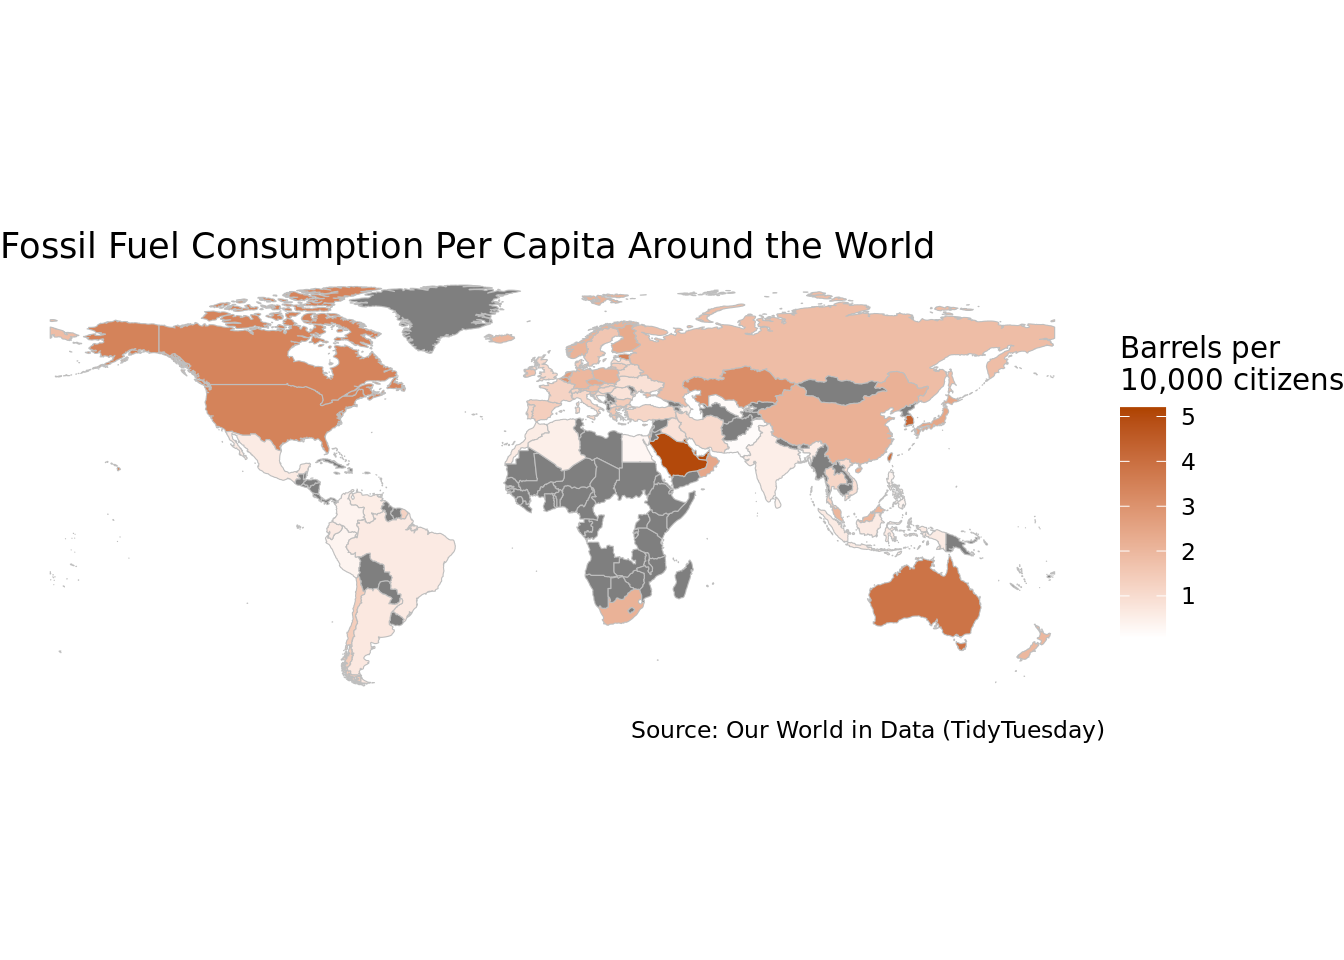 The title of this graph is Oil Consumption Per Capita Around the World. It displays a map of the world shaded in by million barrels of oil consumption. North America and Saudi Arabia have the most oil consumption per capita at around "10" barrels, whereas most of Asia and South America has around "5"  barrels of oil consumption per capita. There is not a lot of data in the African Continent to make an evaluation.